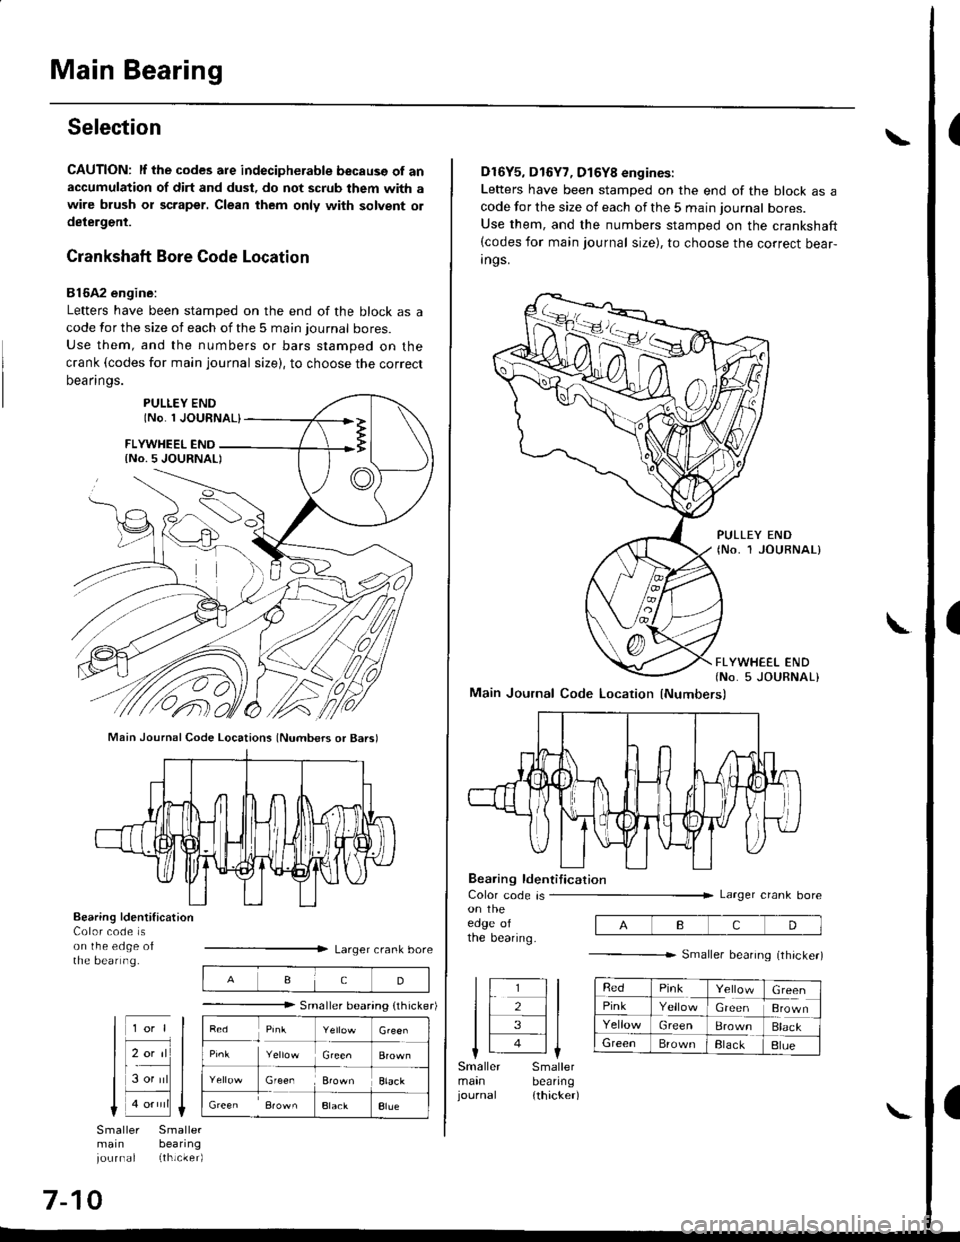 HONDA CIVIC 1999 6.G Owners Guide Main Bearing
Selection
CAUTION: lf the codes are indecipherable because of anaccumulation of dirt and dust, do not scrub them with a
wire brush or scraper. Clean them only with solvent ol
deiergent.
C